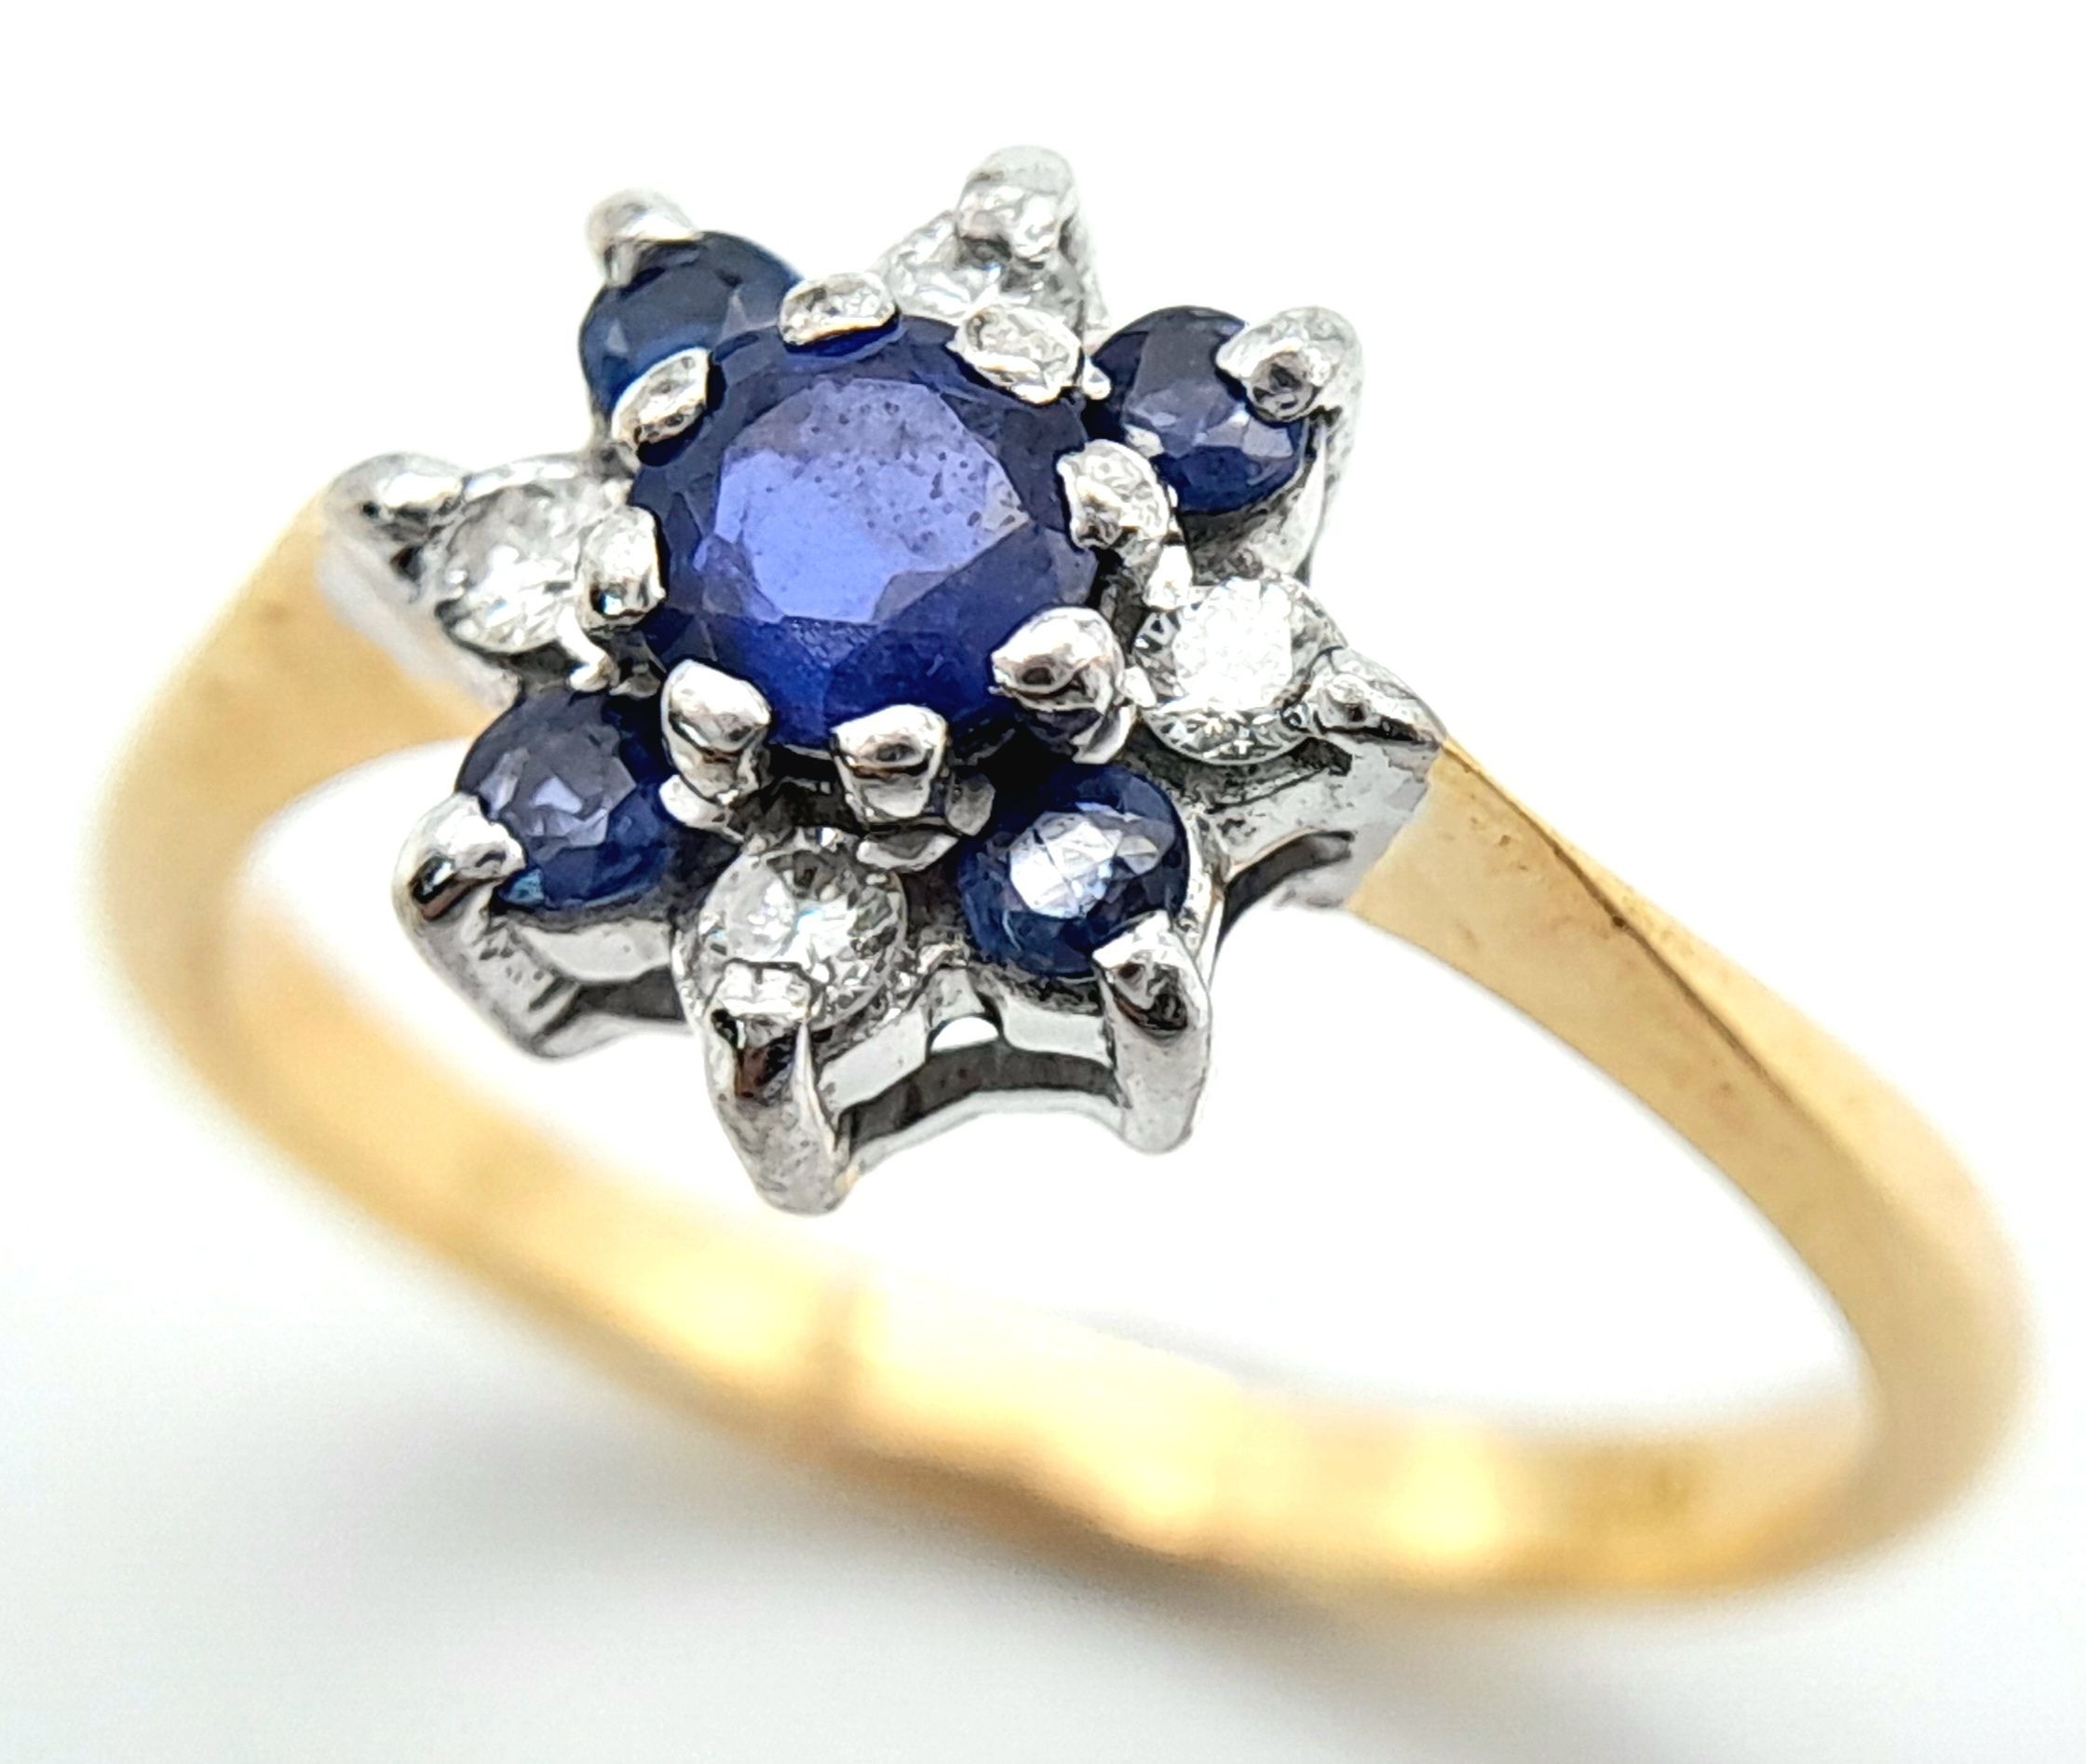 AN 18K YELLOW GOLD DIAMOND AND SAPPHIRE CLUSTER RING. 3.3G. SIZE L - Image 3 of 6